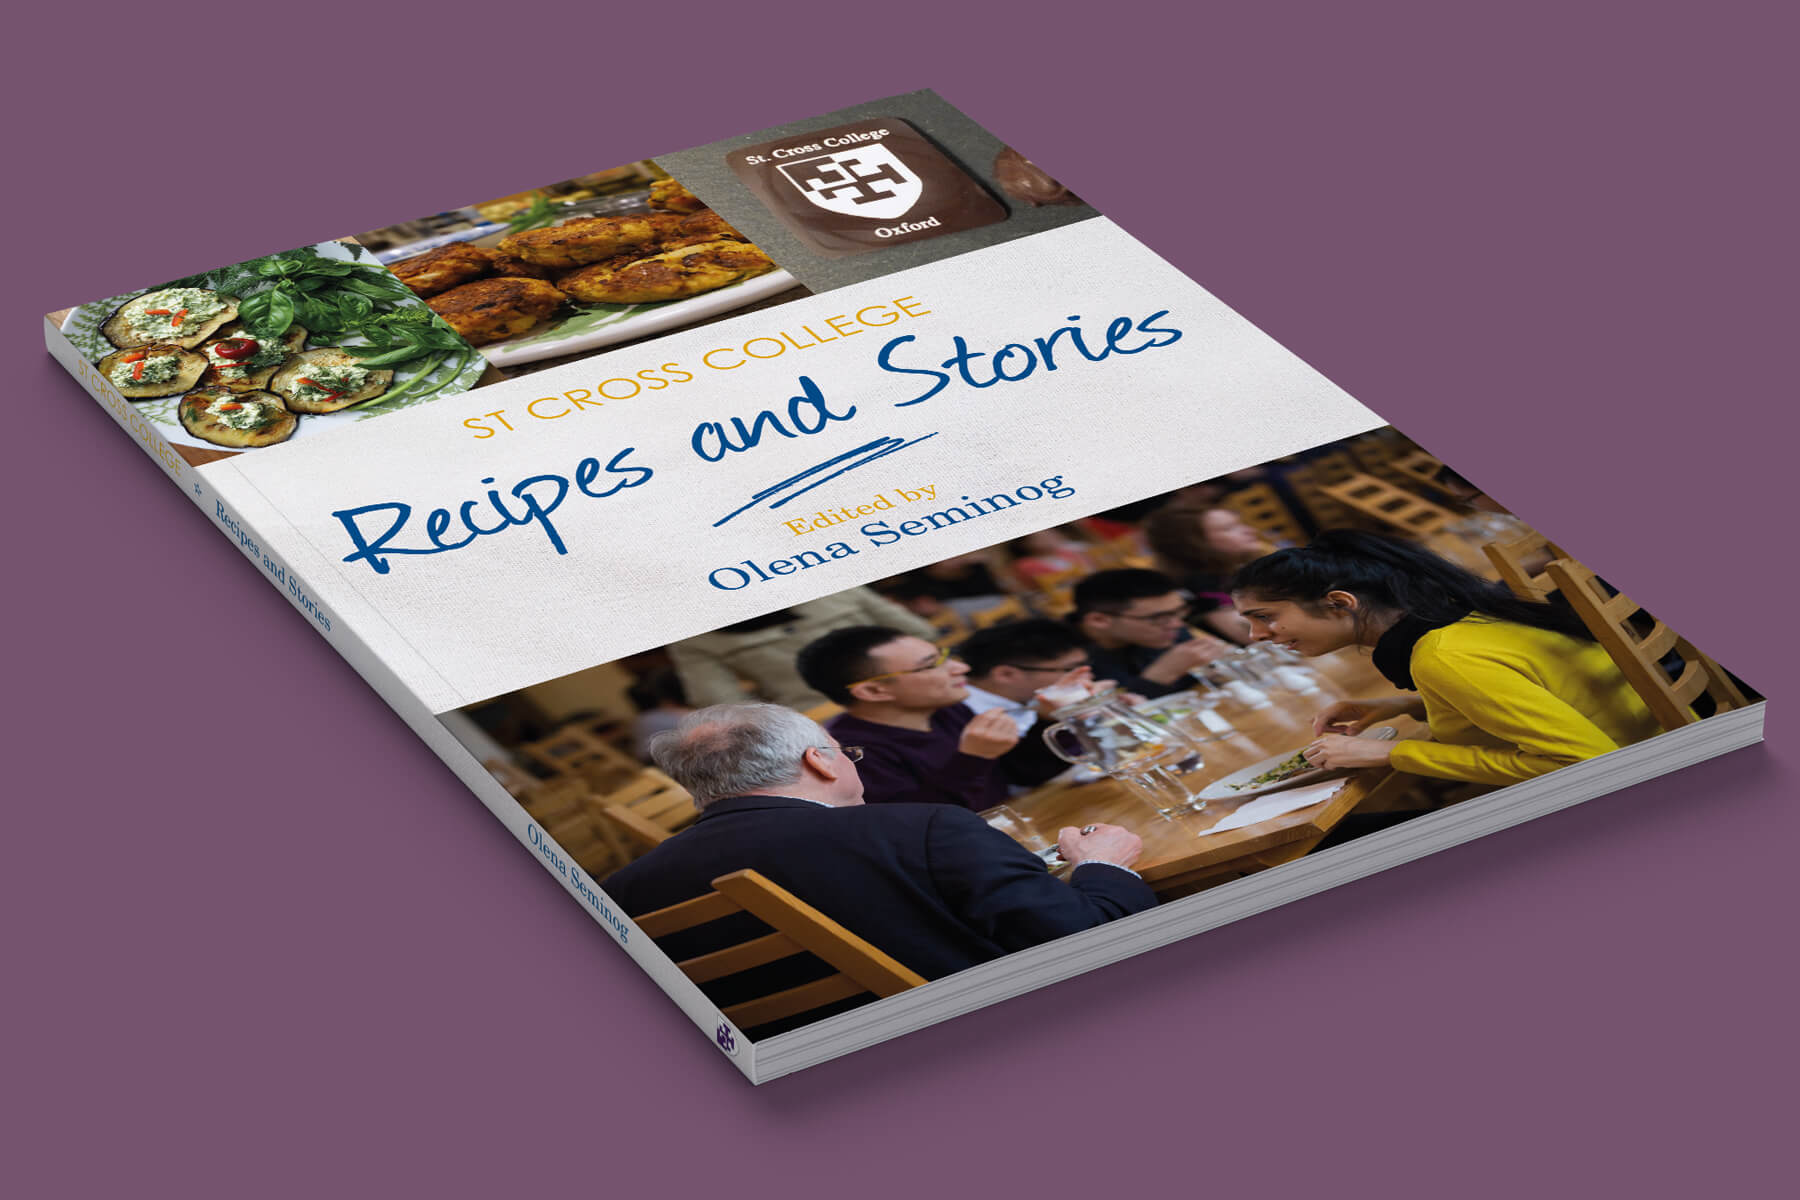 St Cross College Recipes and Stories cover